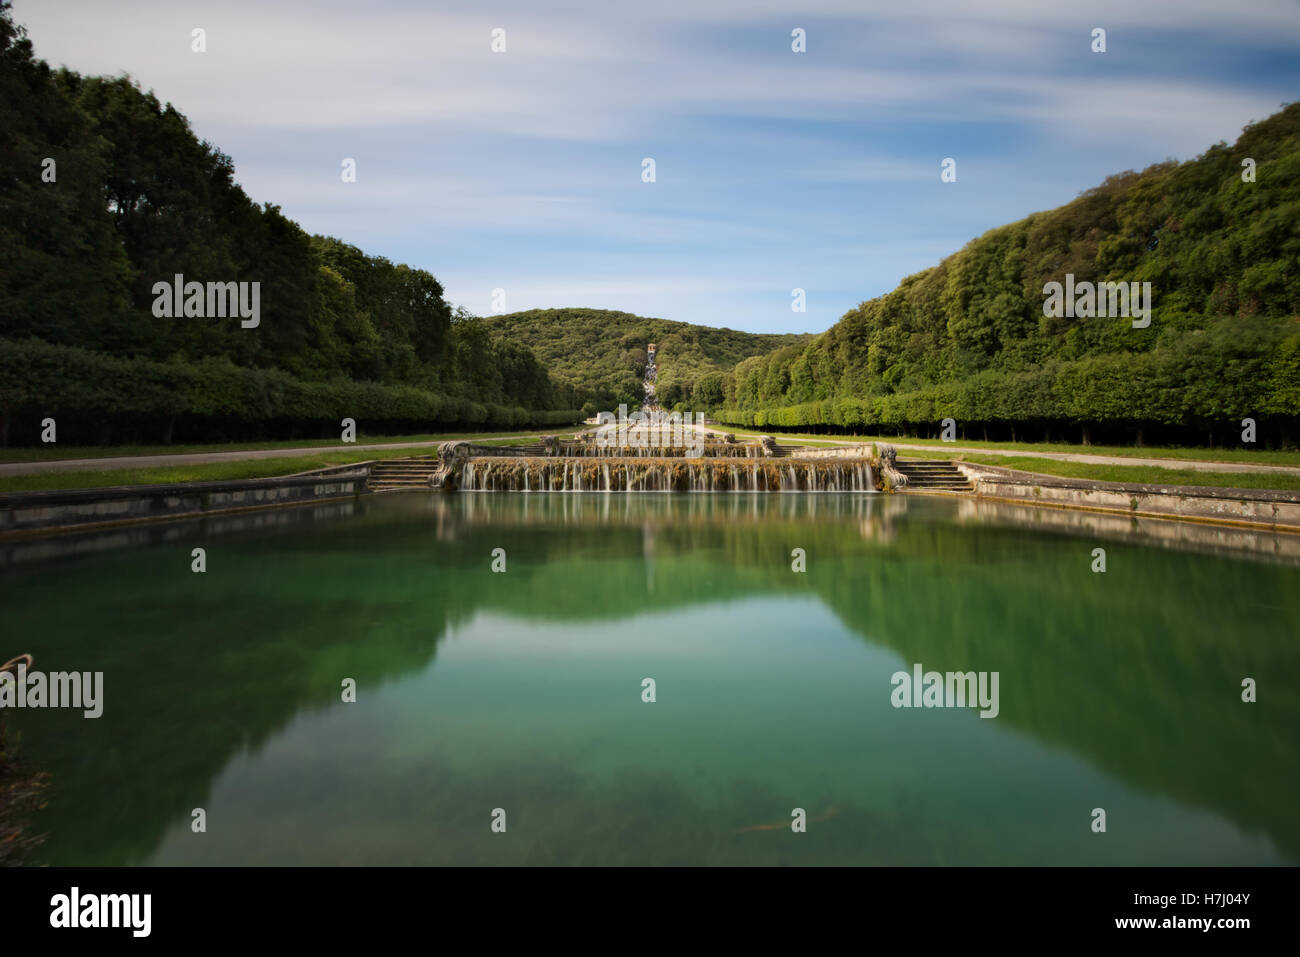 Long exposure of the gardens and reflecting pool. Royal Palace of Caserta, the Park. Stock Photo